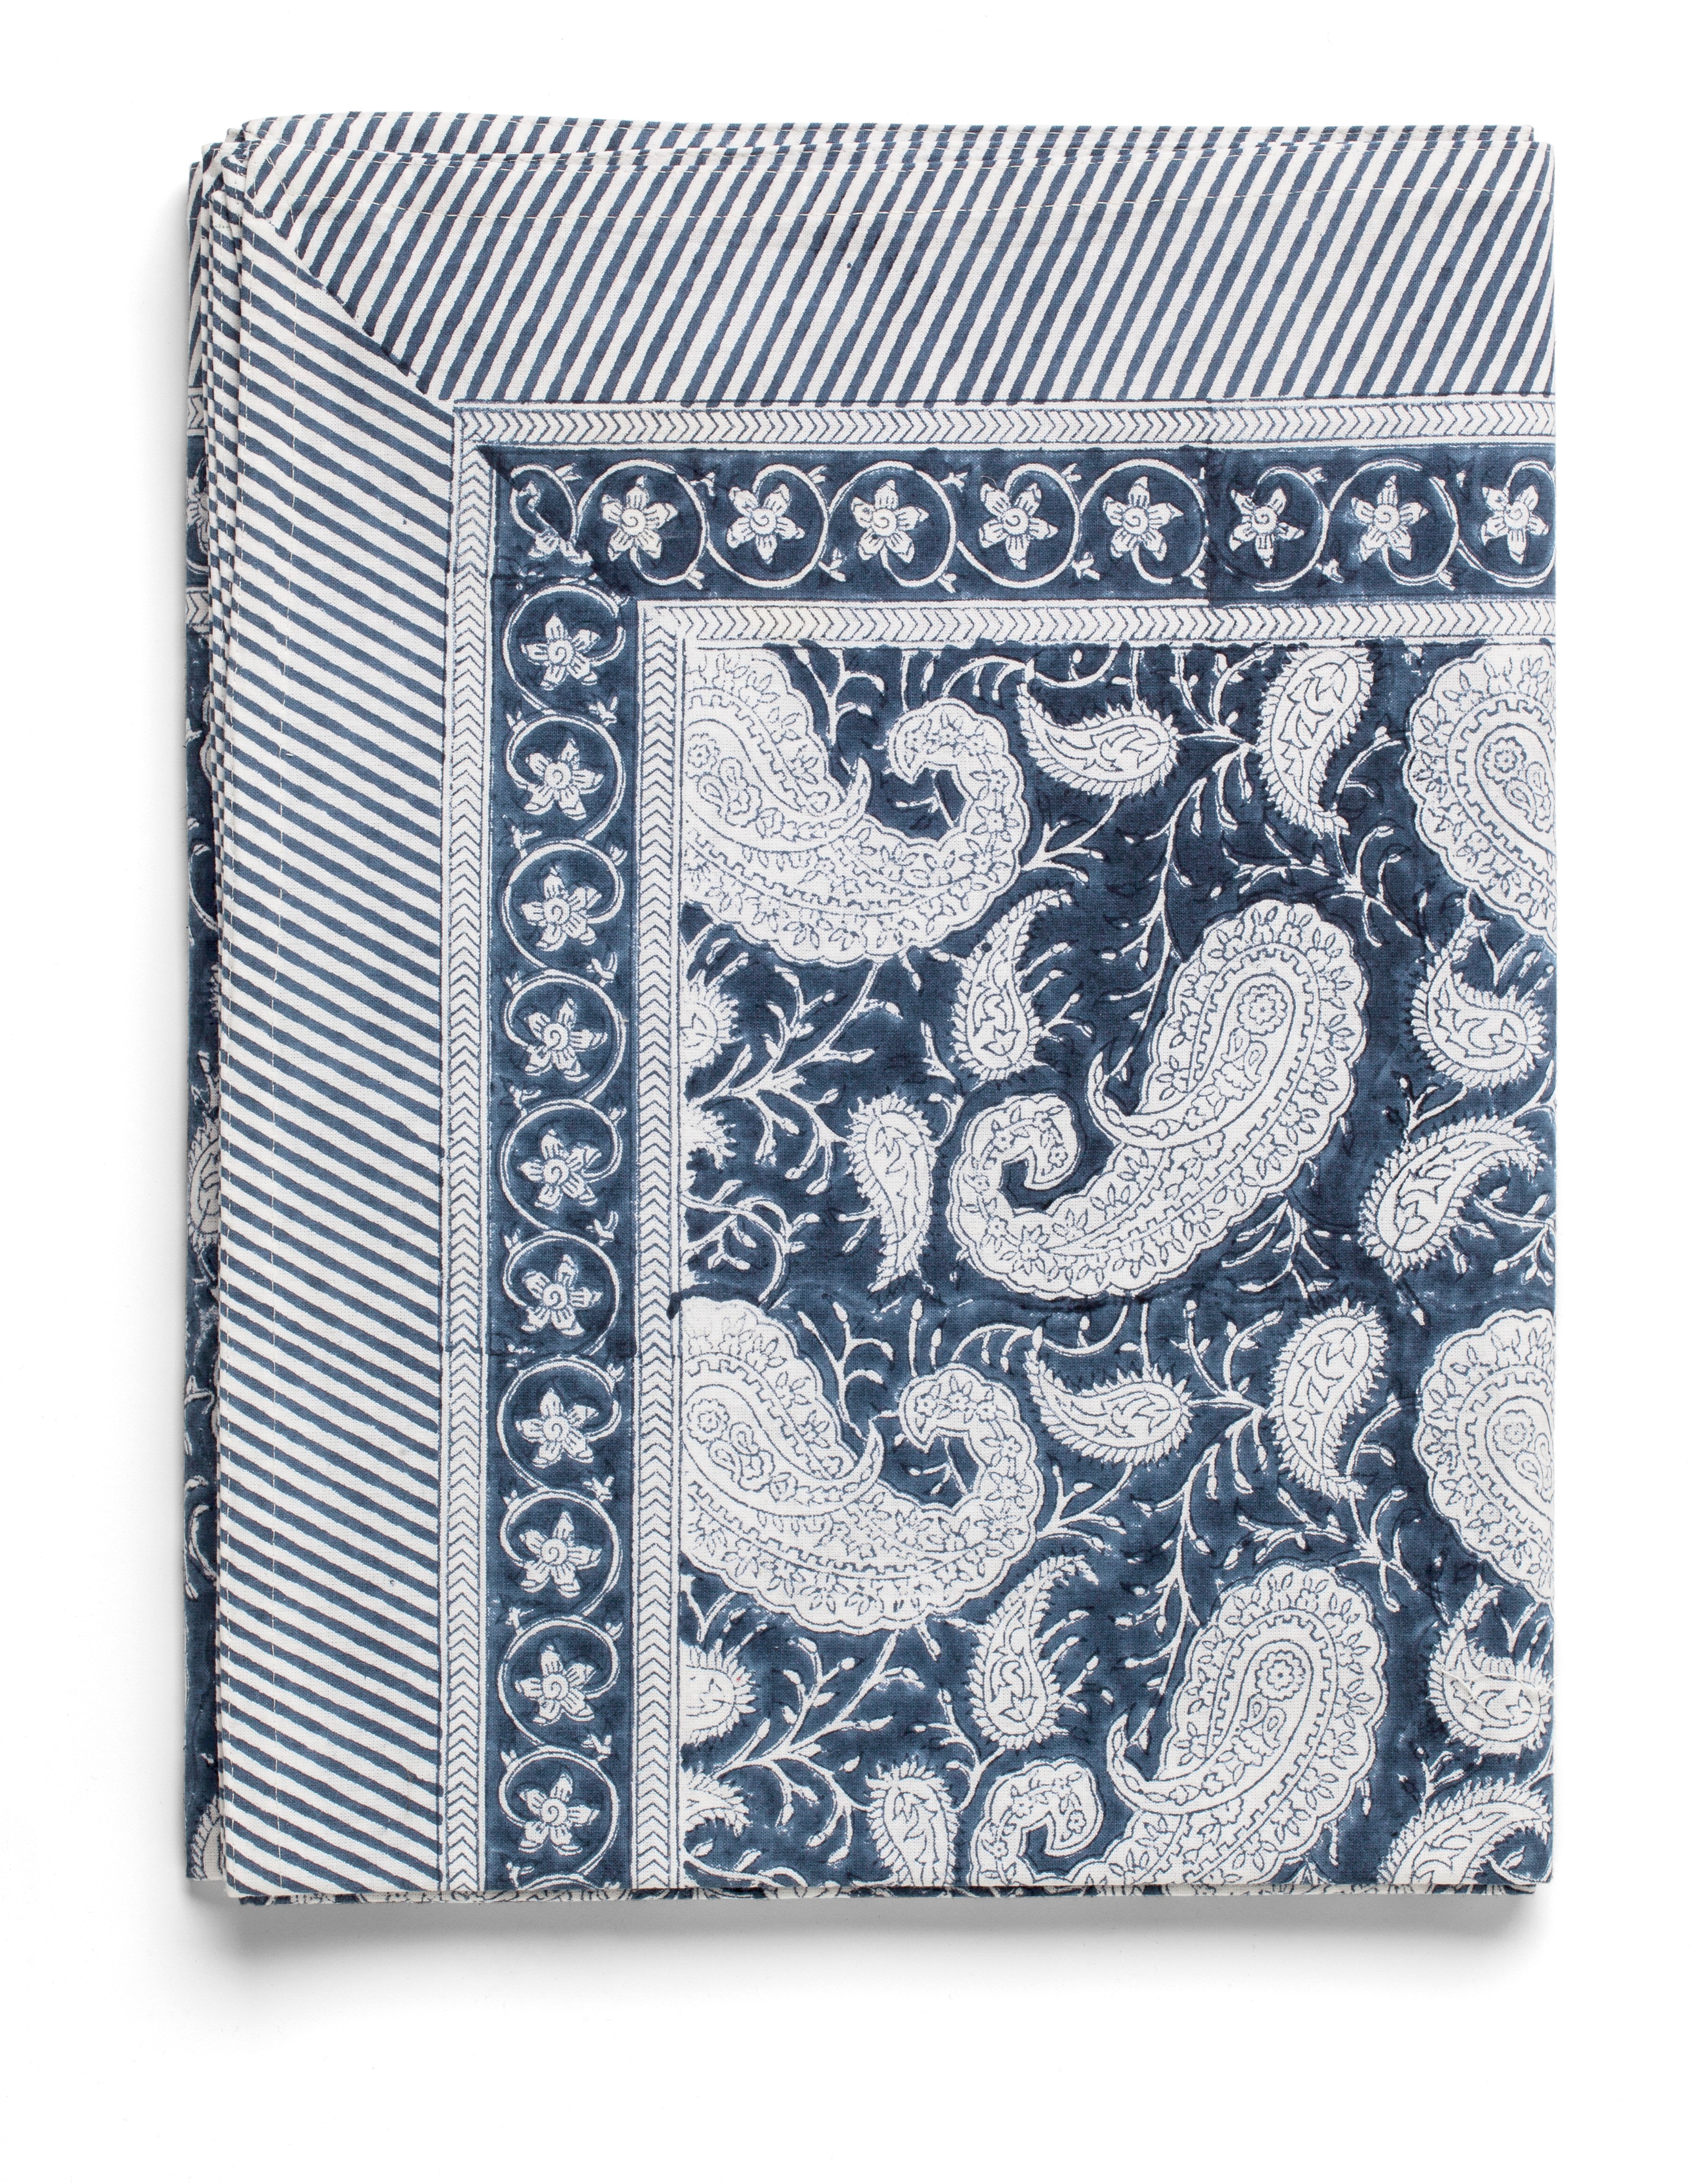 Tablecloth with Big Paisley® print in Navy Blue